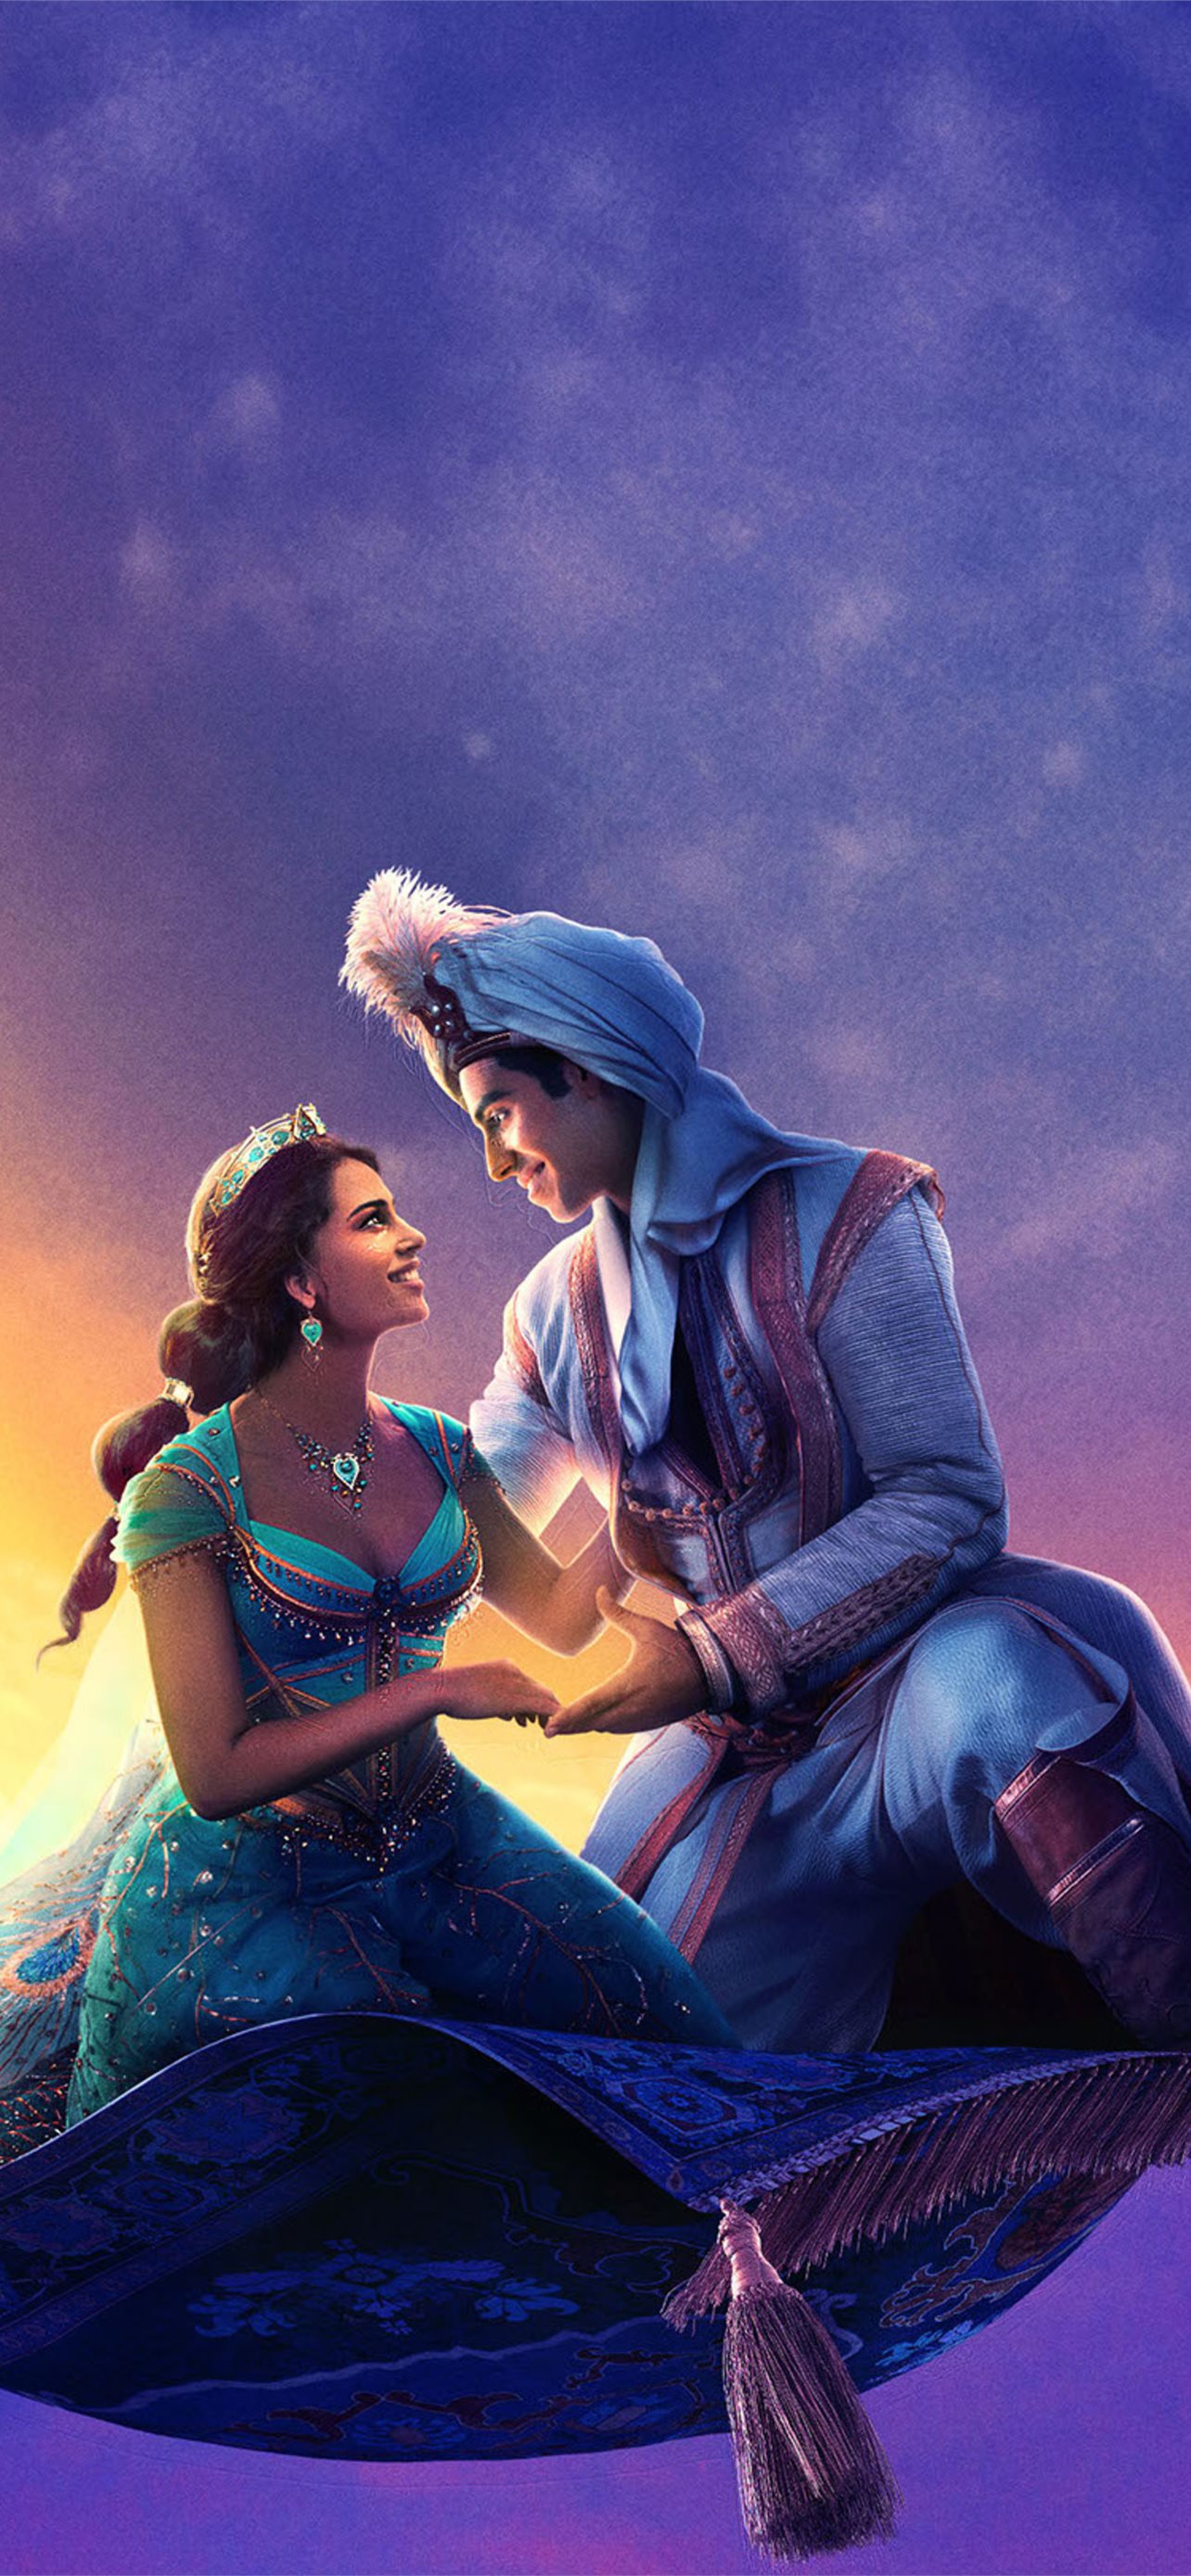 Aladdin 2019 Movie 4K Samsung Galaxy Note 9 8 S9 S... Iphone Wallpapers  Free Download